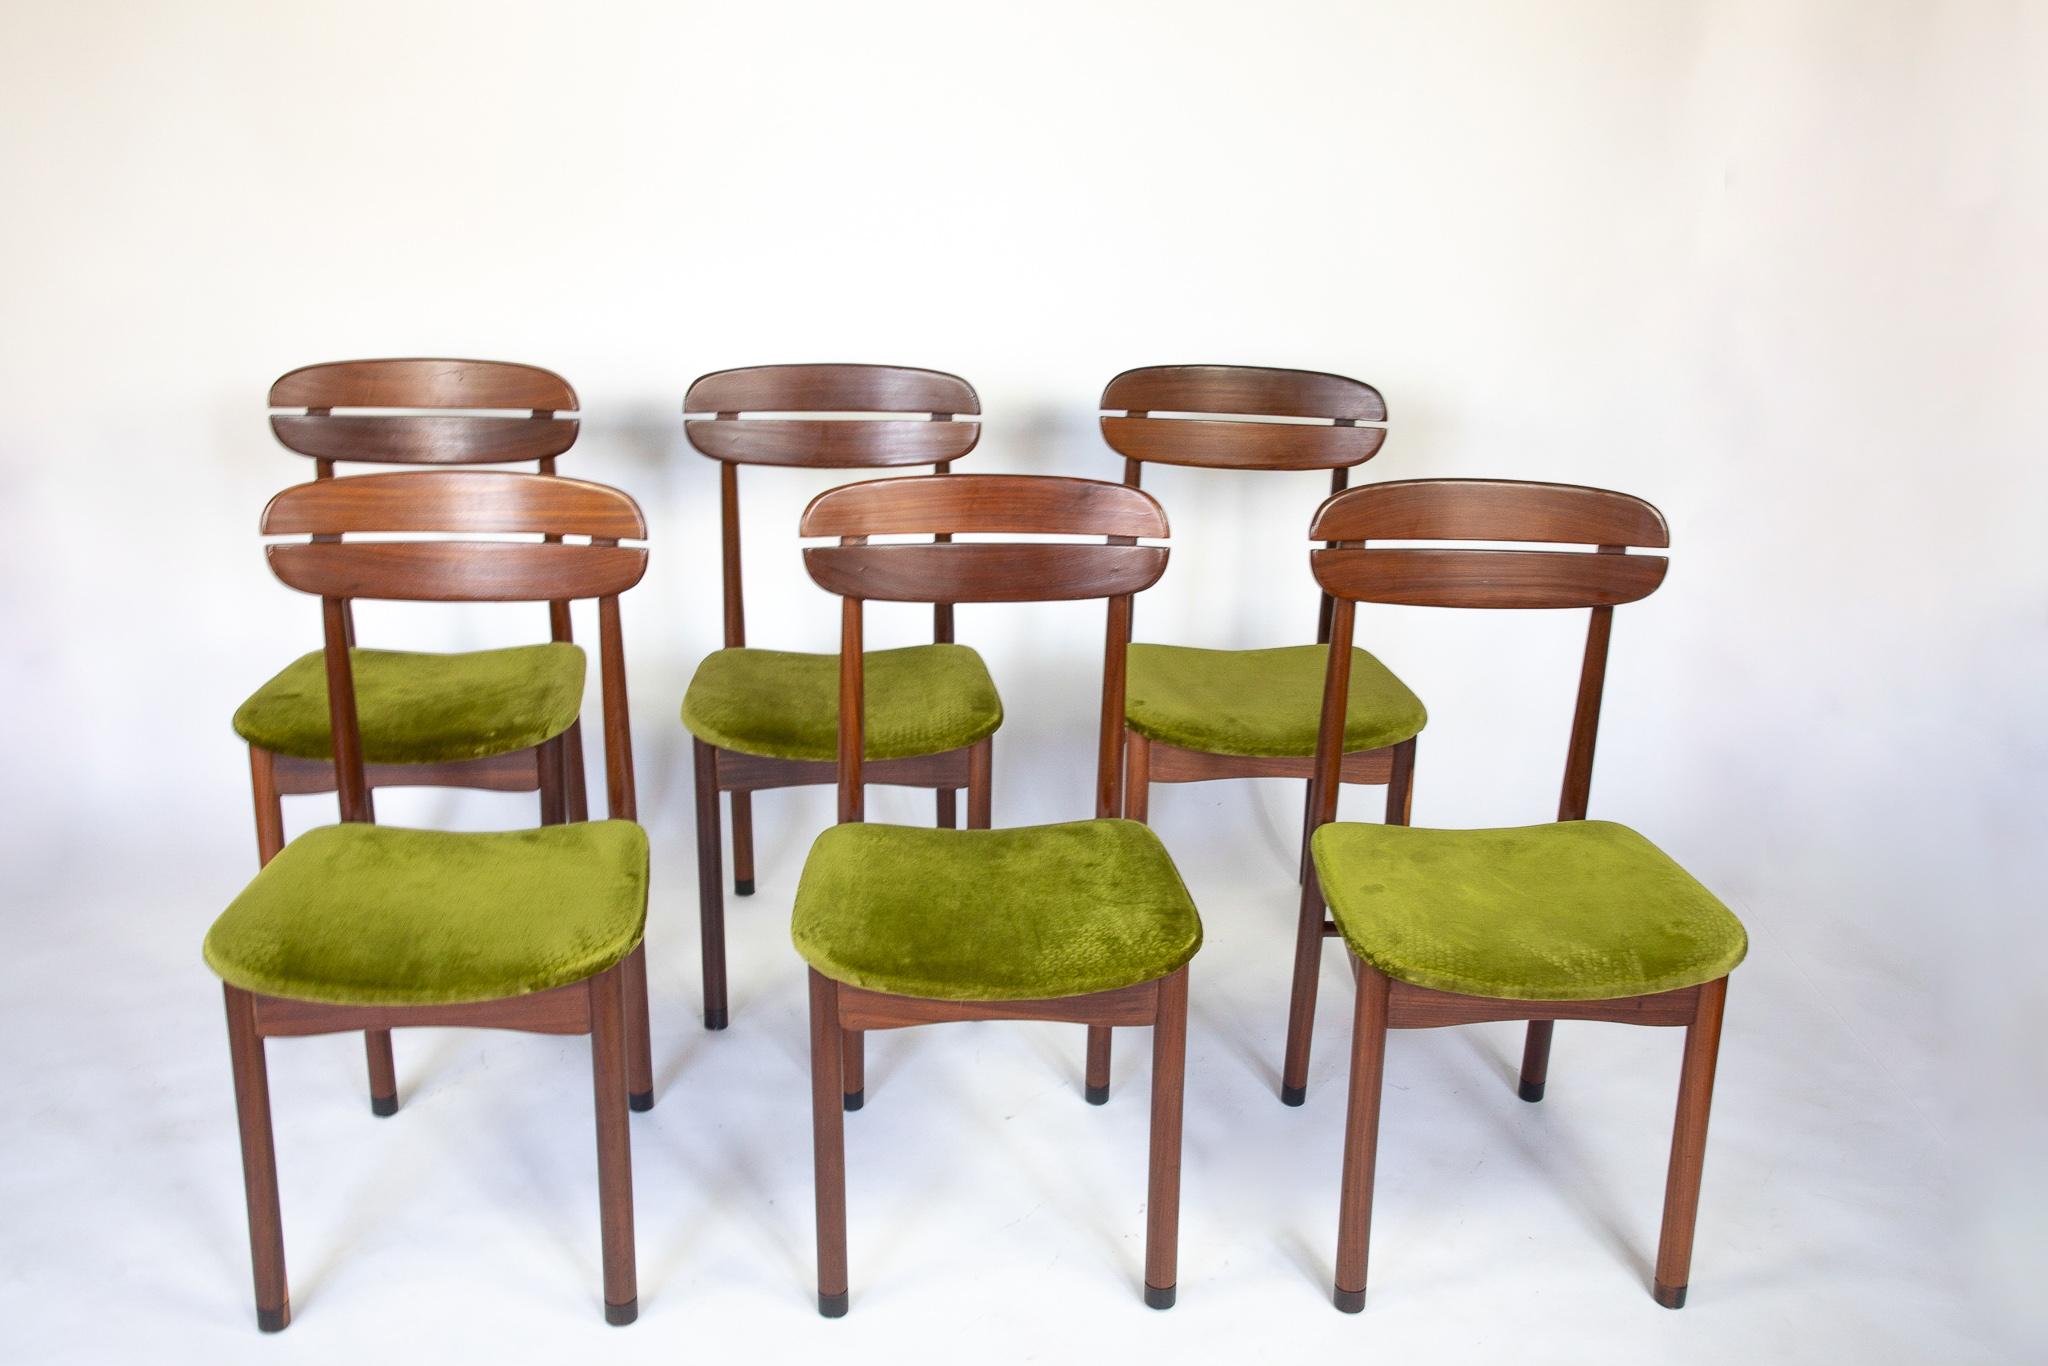 Mid Century Modern dining chairs with green velvet upholstery, set of 6, 1950s

This set of six midcentury modern dining chairs made from teak adds a subtle elegance to every dining room. Their vibrant green upholstery is in perfect condition and